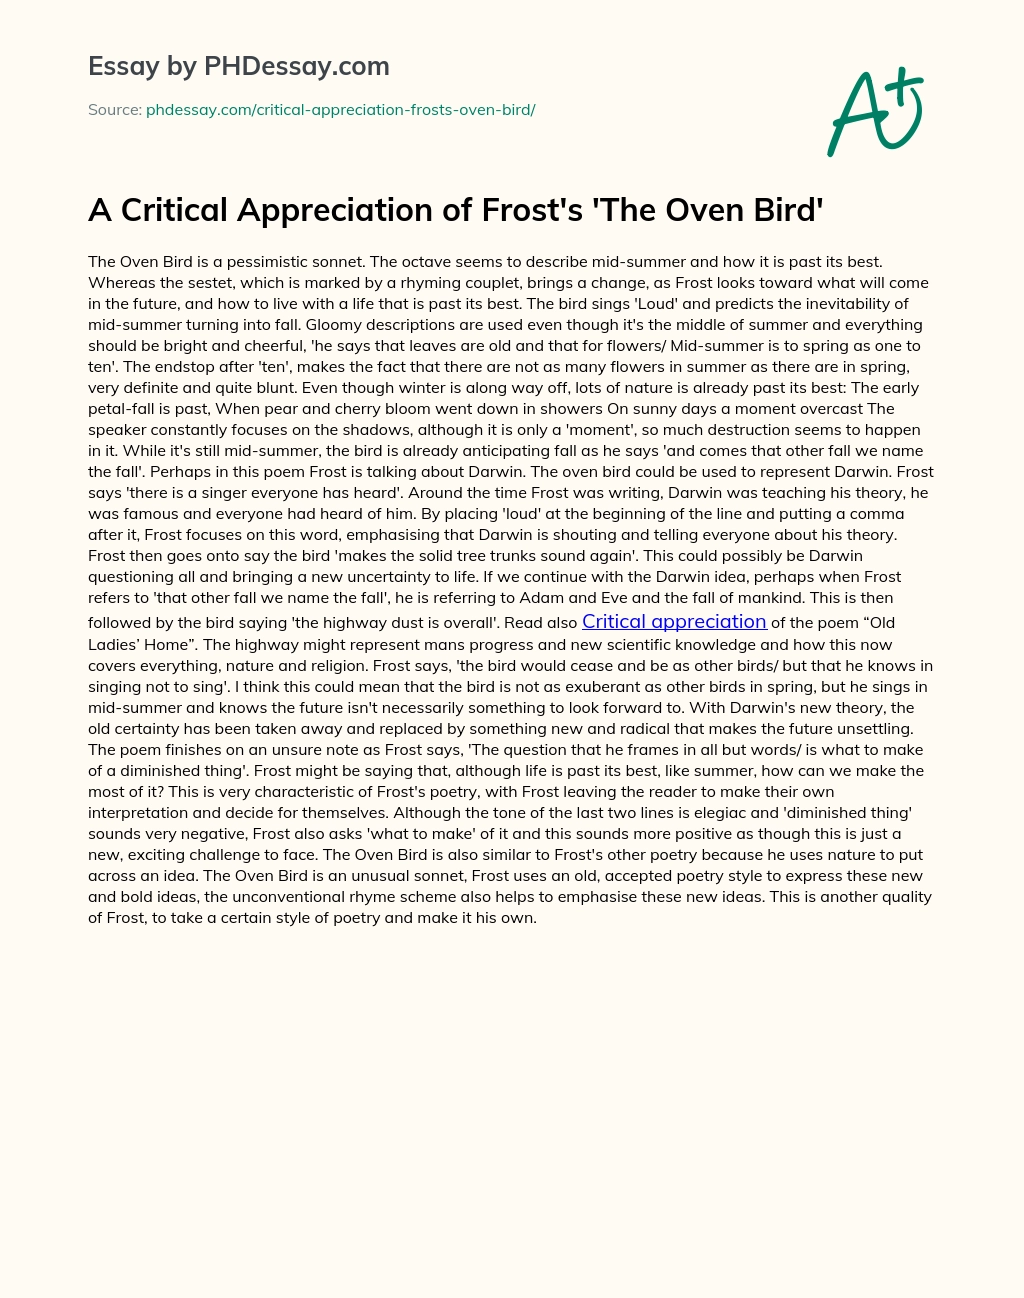 A Critical Appreciation of Frost’s ‘The Oven Bird’ essay